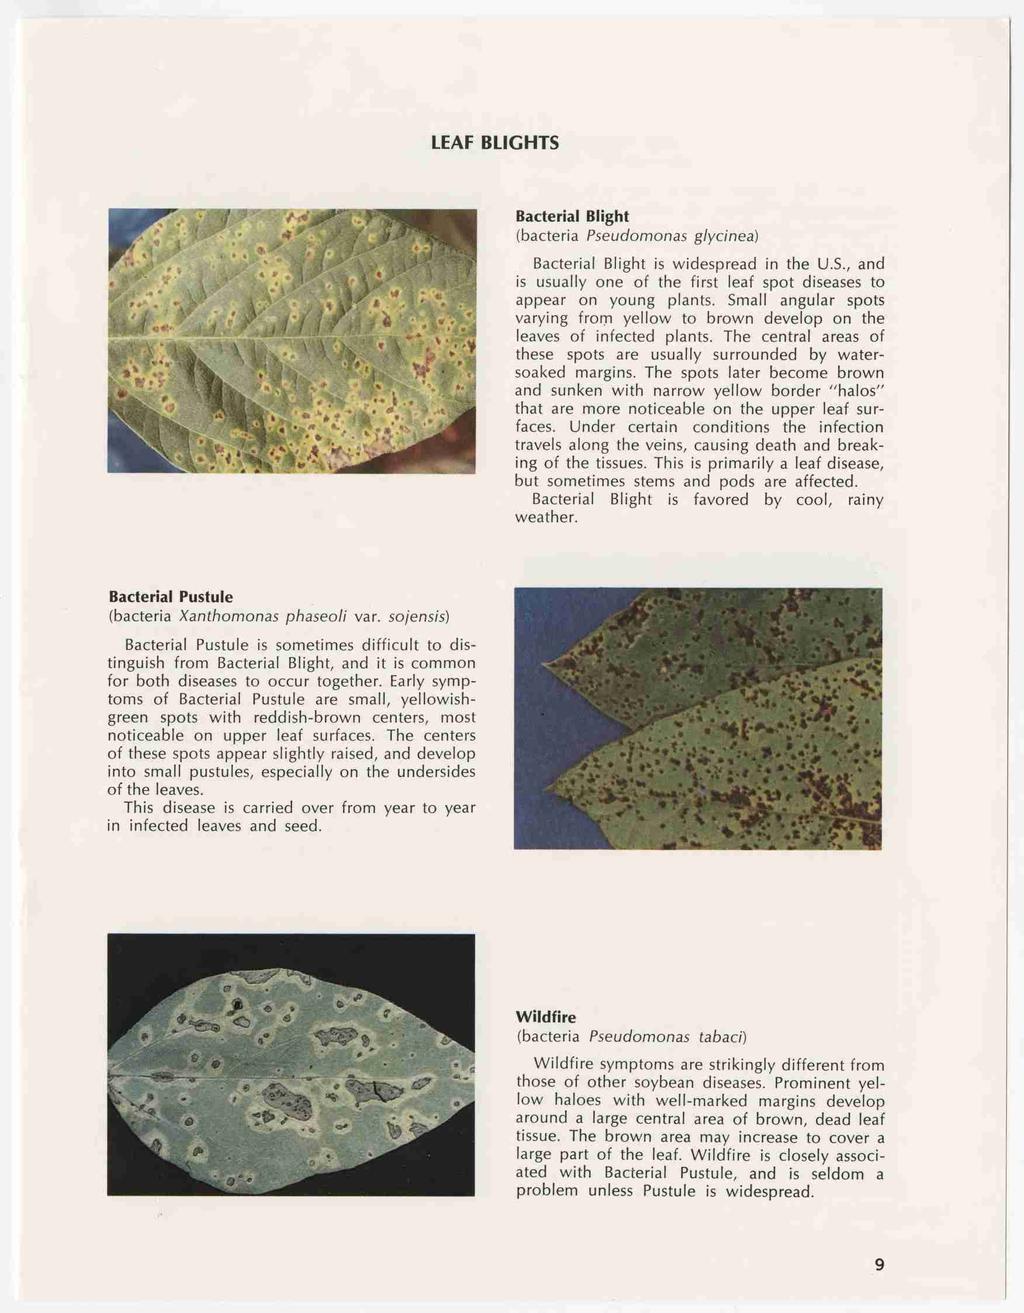 LEAF BLIGHTS Bacterial Blight (bacteria Pseudomonas glycinea) Bacterial Blight is widespread in the U.S., and is usually one of the first leaf spot diseases to appear on young plants.